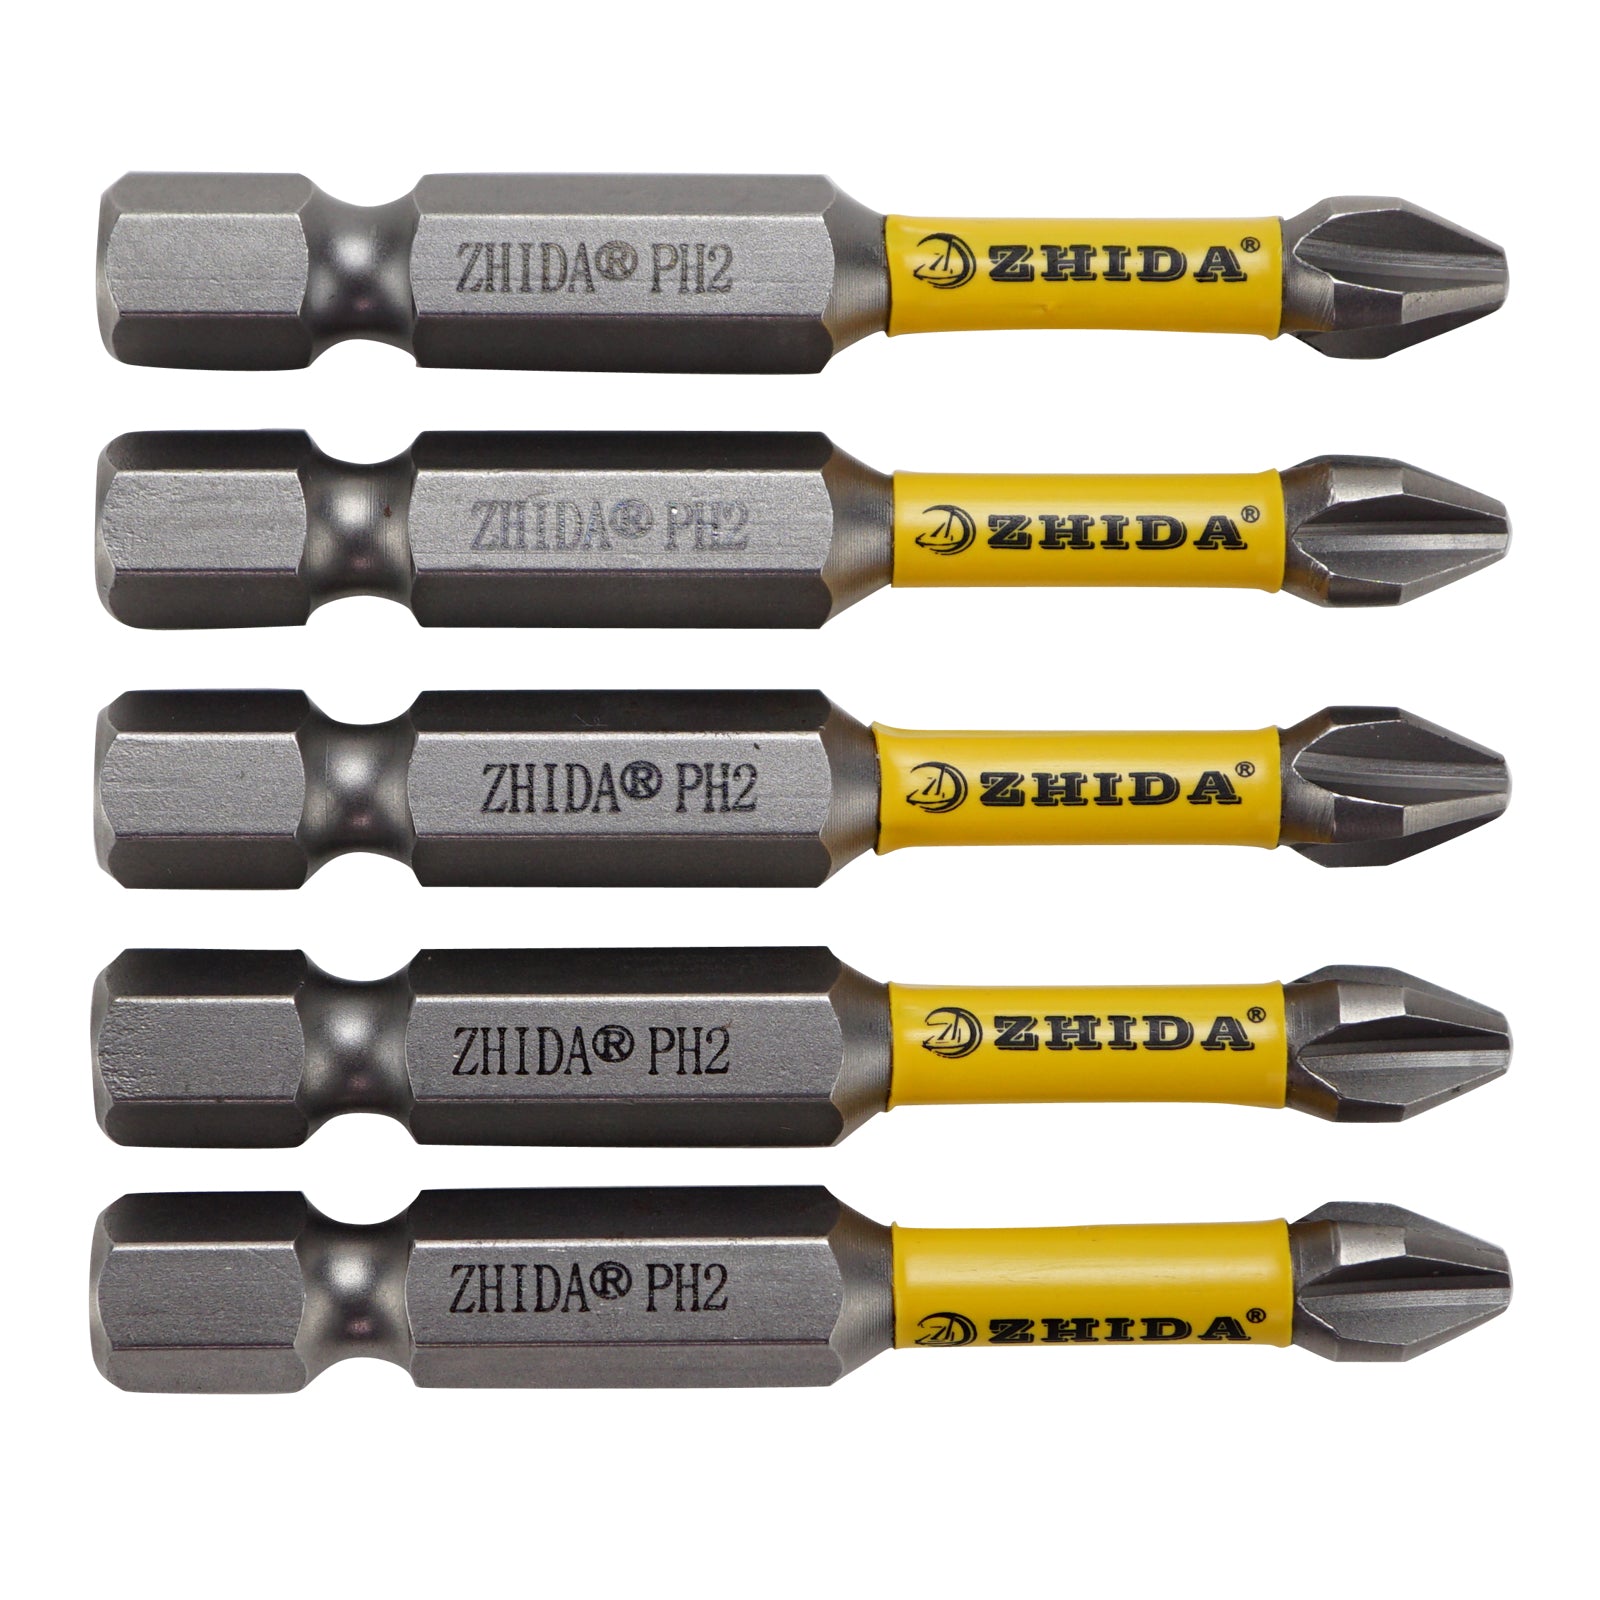 Screwdriver Bits: The Essential Tool for Everyday Maintenance and Repairs